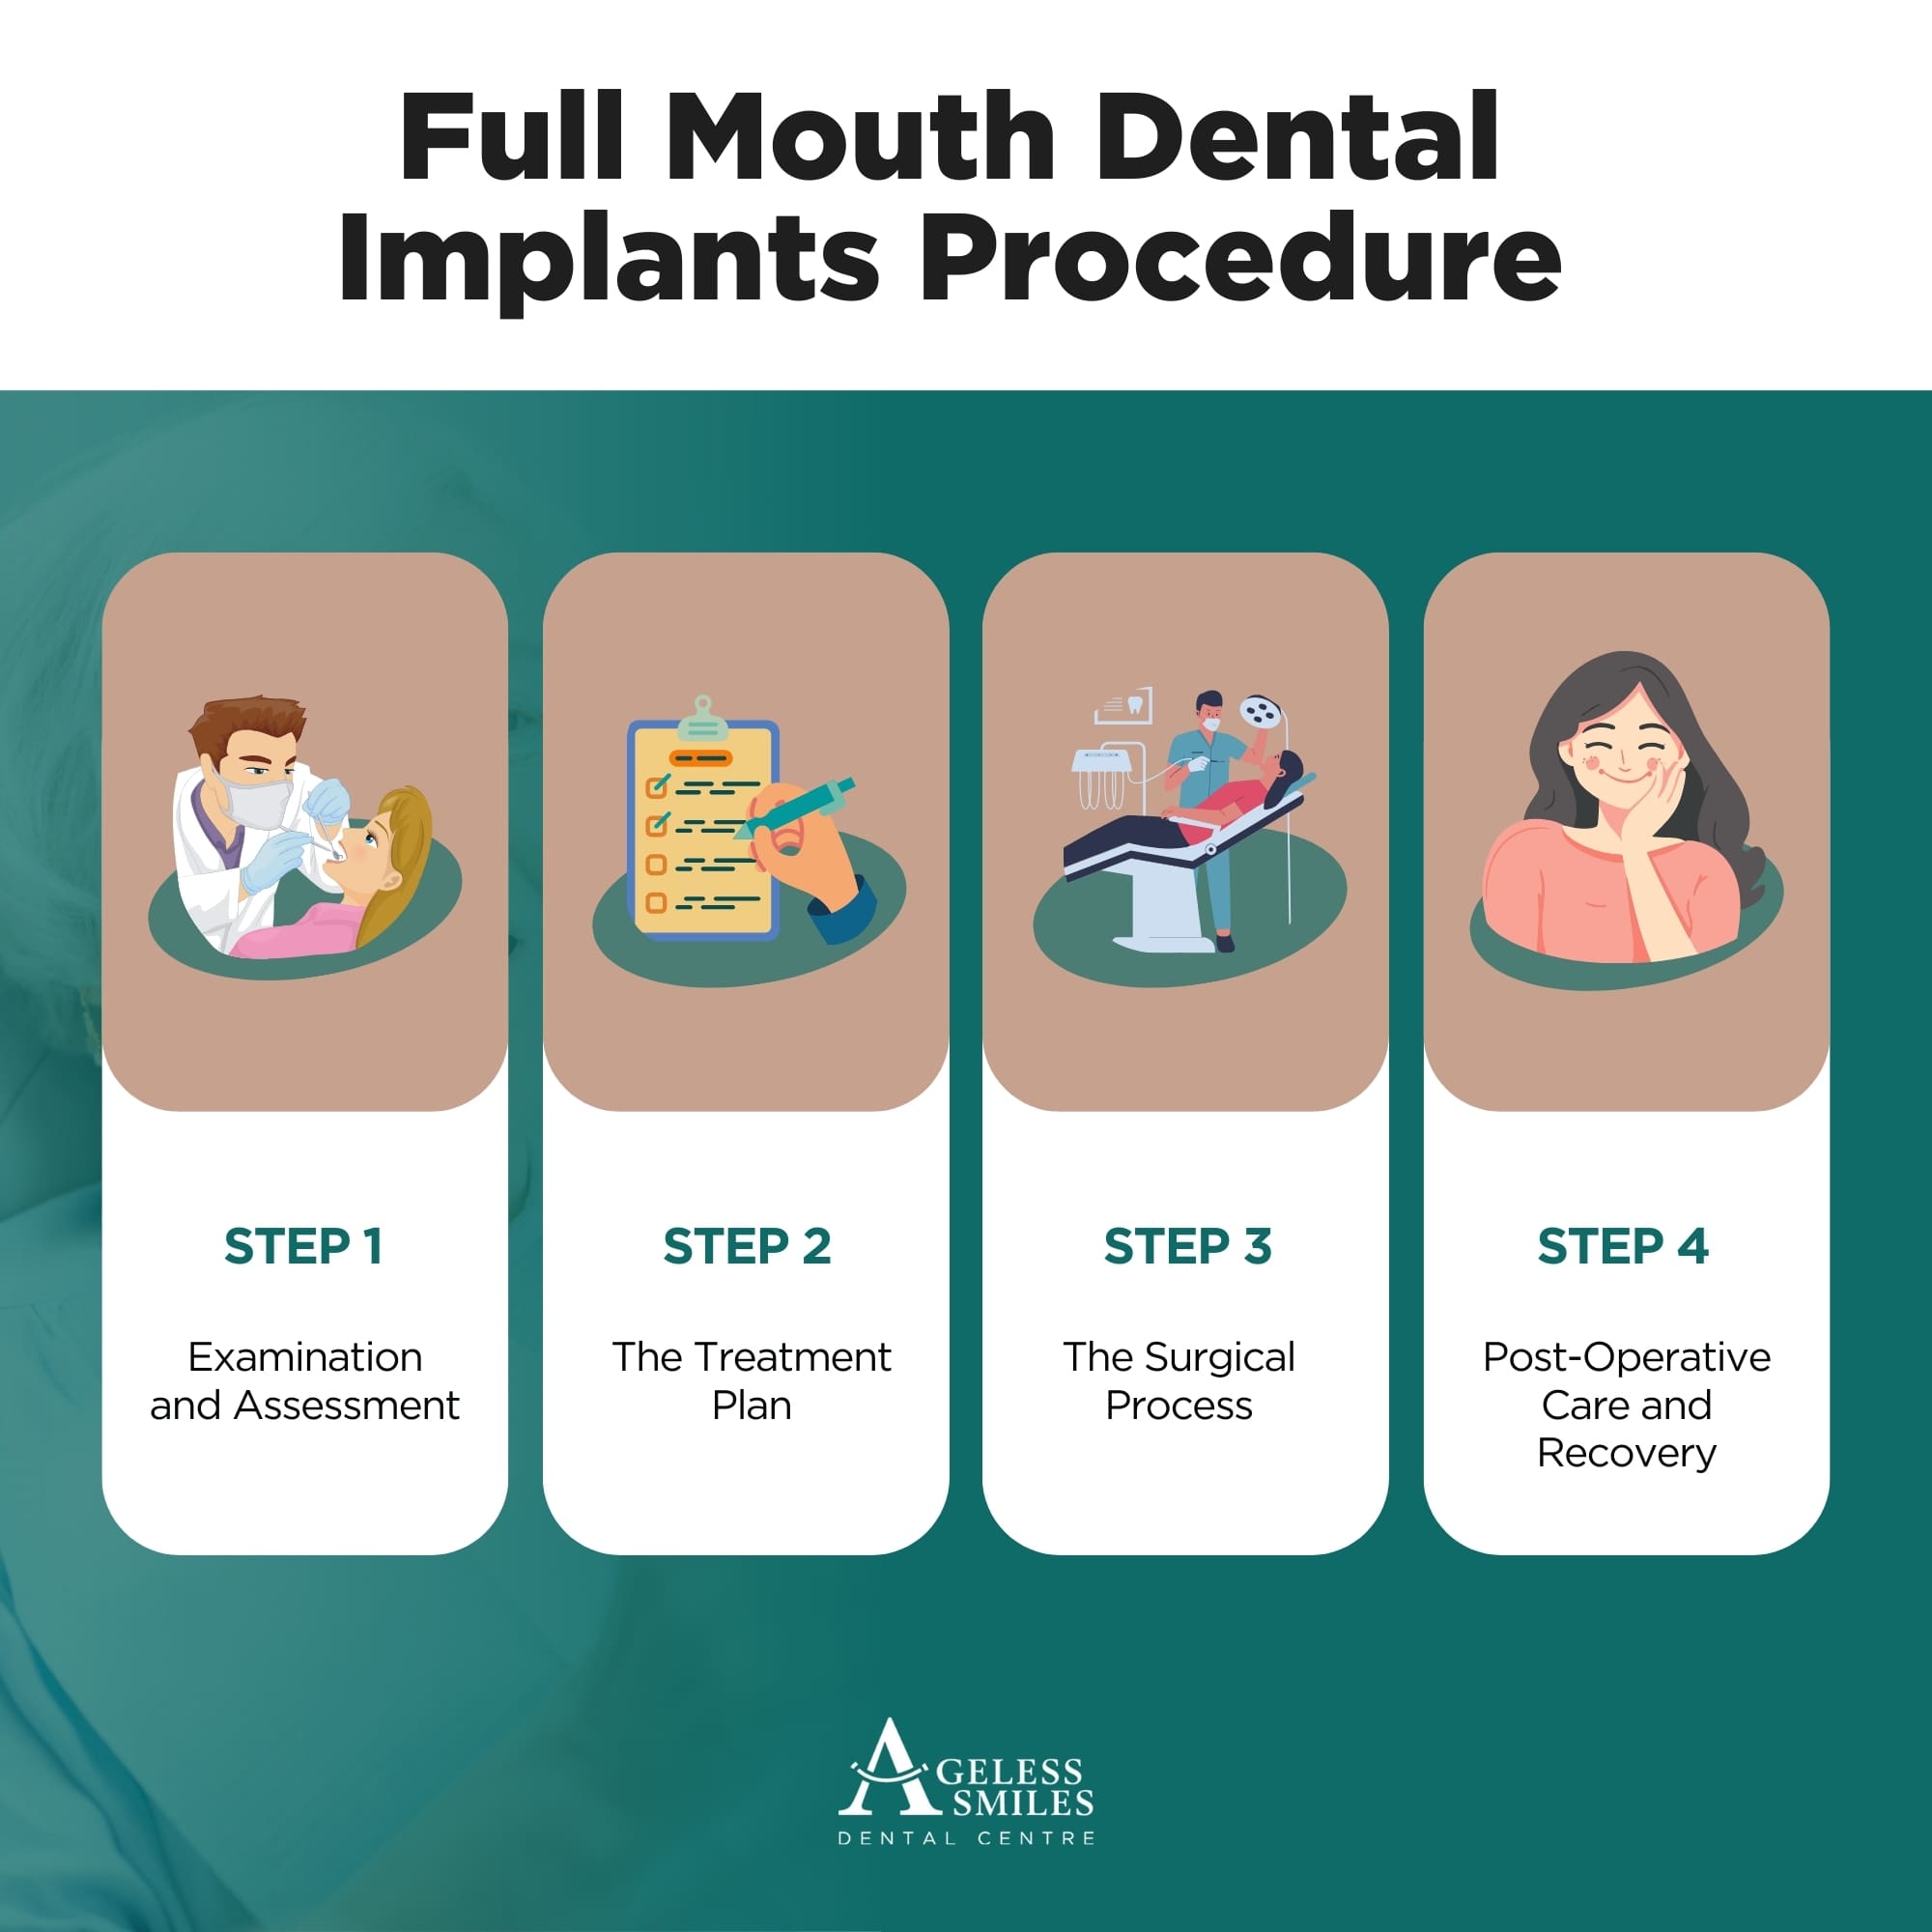 Full Mouth Dental Implants Cost and Options In Perth